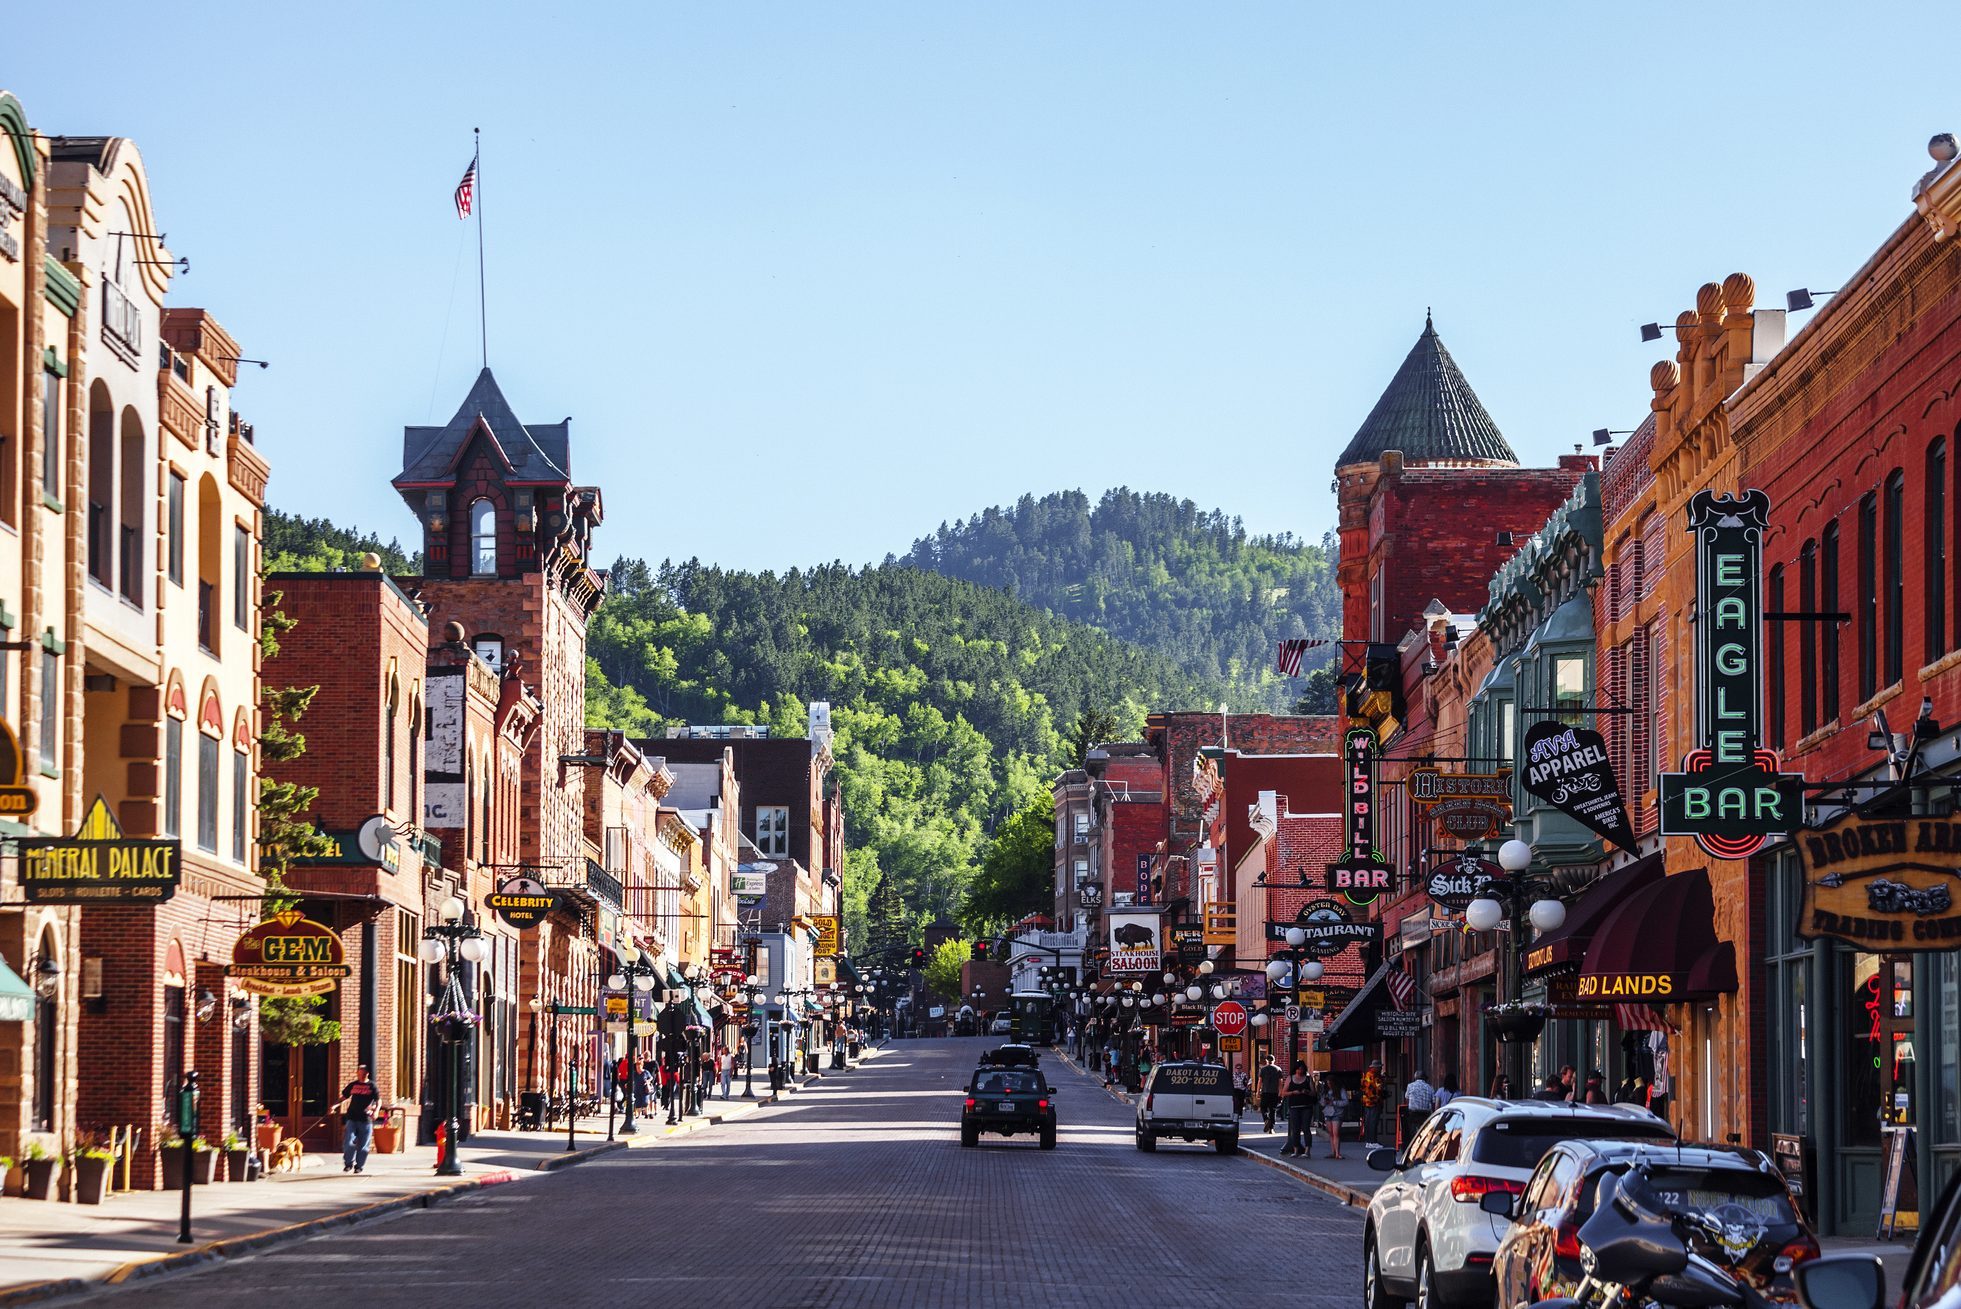 <p>It's more than an HBO show: <a href="https://www.tripadvisor.com/Attractions-g54578-Activities-Deadwood_South_Dakota.html" rel="noopener">Deadwood, South Dakota</a>, is the town where Wild Bill Hickock was shot in the back while playing poker. It's also where Calamity Jane is buried. Deadwood has all the makings of a Wild West ghost town, but it's thriving these days, thanks in part to the Deadwood Historic District, which takes you back in time to Deadwood's Golden Age—a time when everyone was rushing to dig up the gold from the Black Hills and lawlessness was pretty much the law.</p> <p class="listicle-page__cta-button-shop"><a class="shop-btn" href="https://www.tripadvisor.com/Attractions-g54578-Activities-Deadwood_South_Dakota.html">Learn More</a></p>